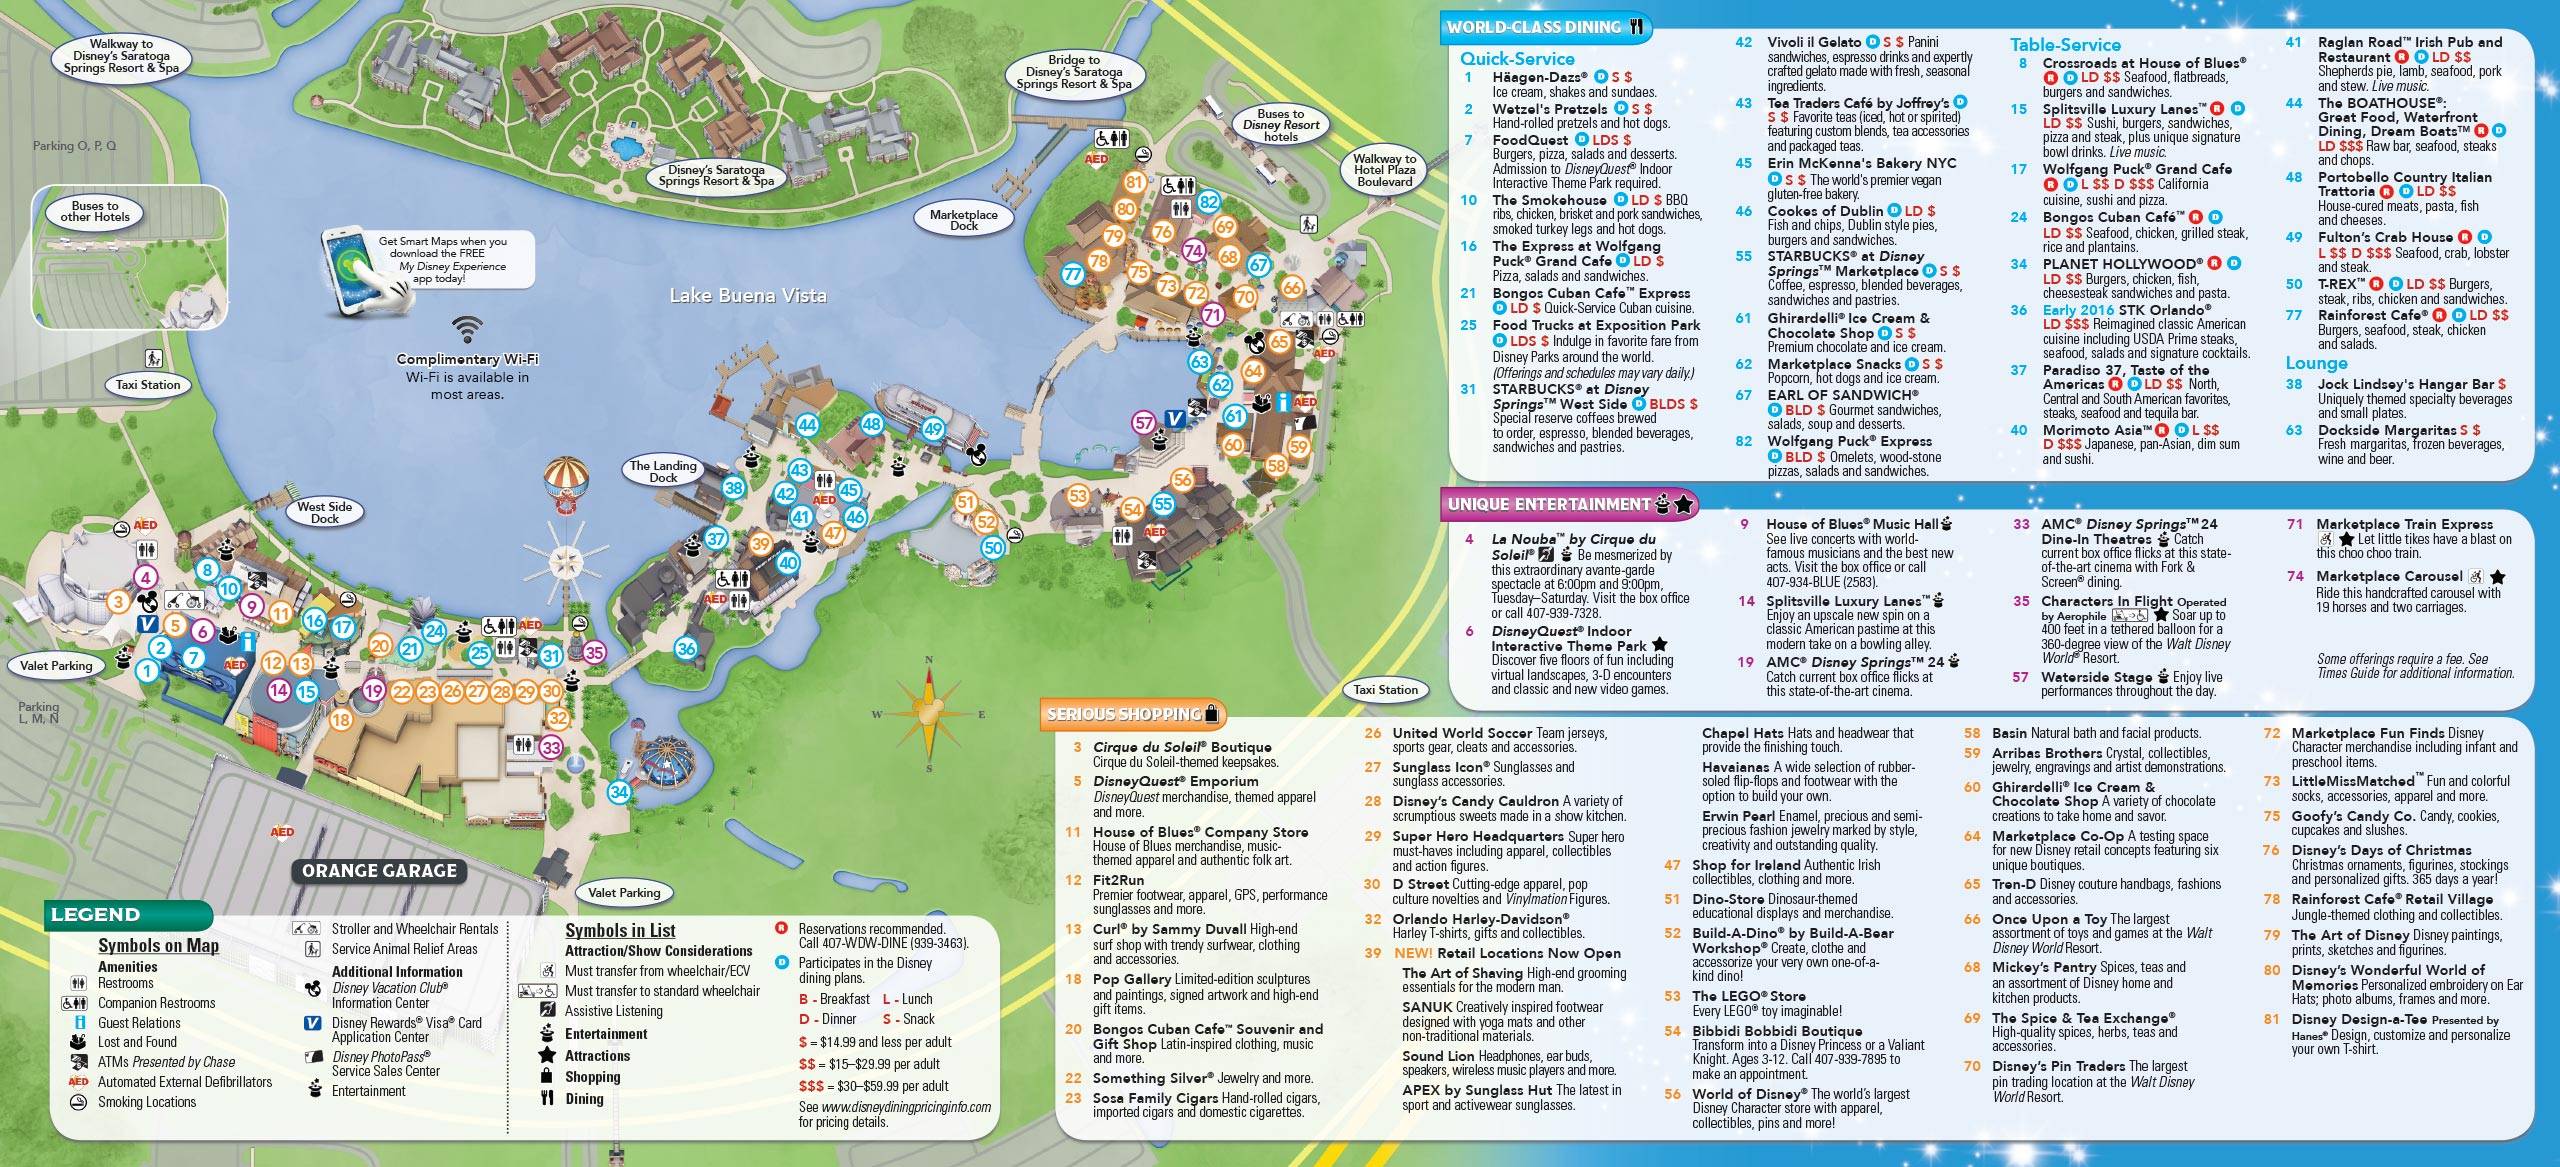 PHOTOS - Downtown Disney officially transitions to Disney Springs today - see the new guide map